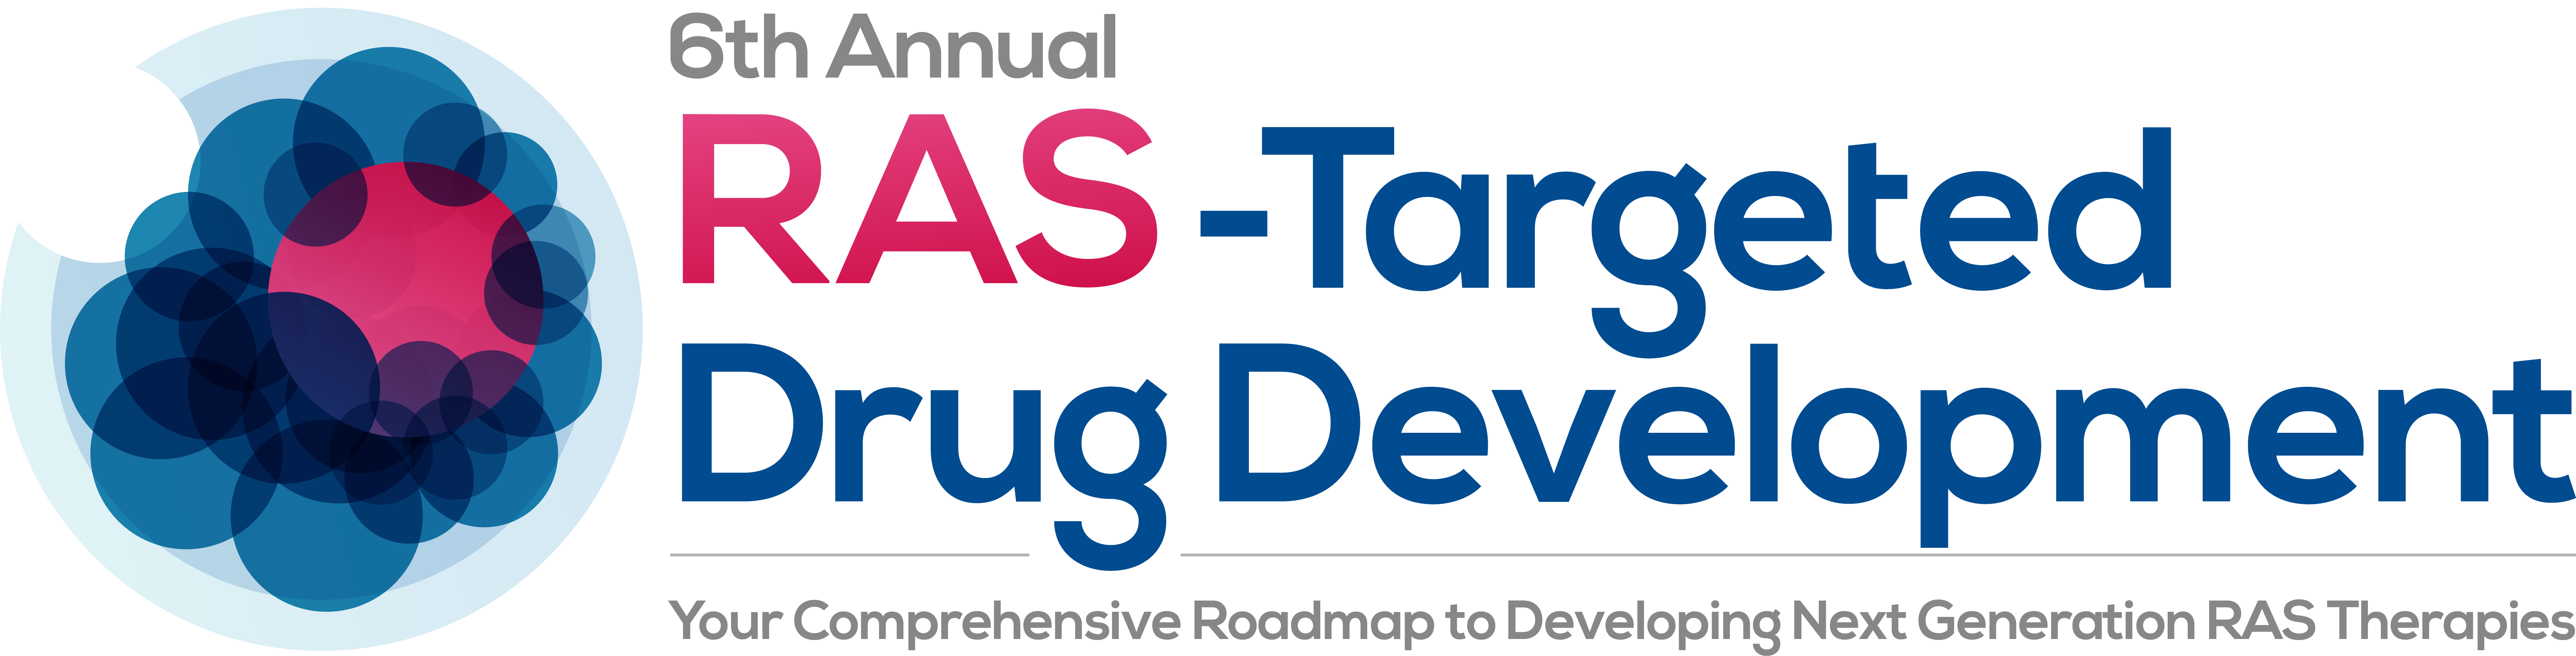 Next in Series - 6th RAS Targeted Drug Discovery Summit logo